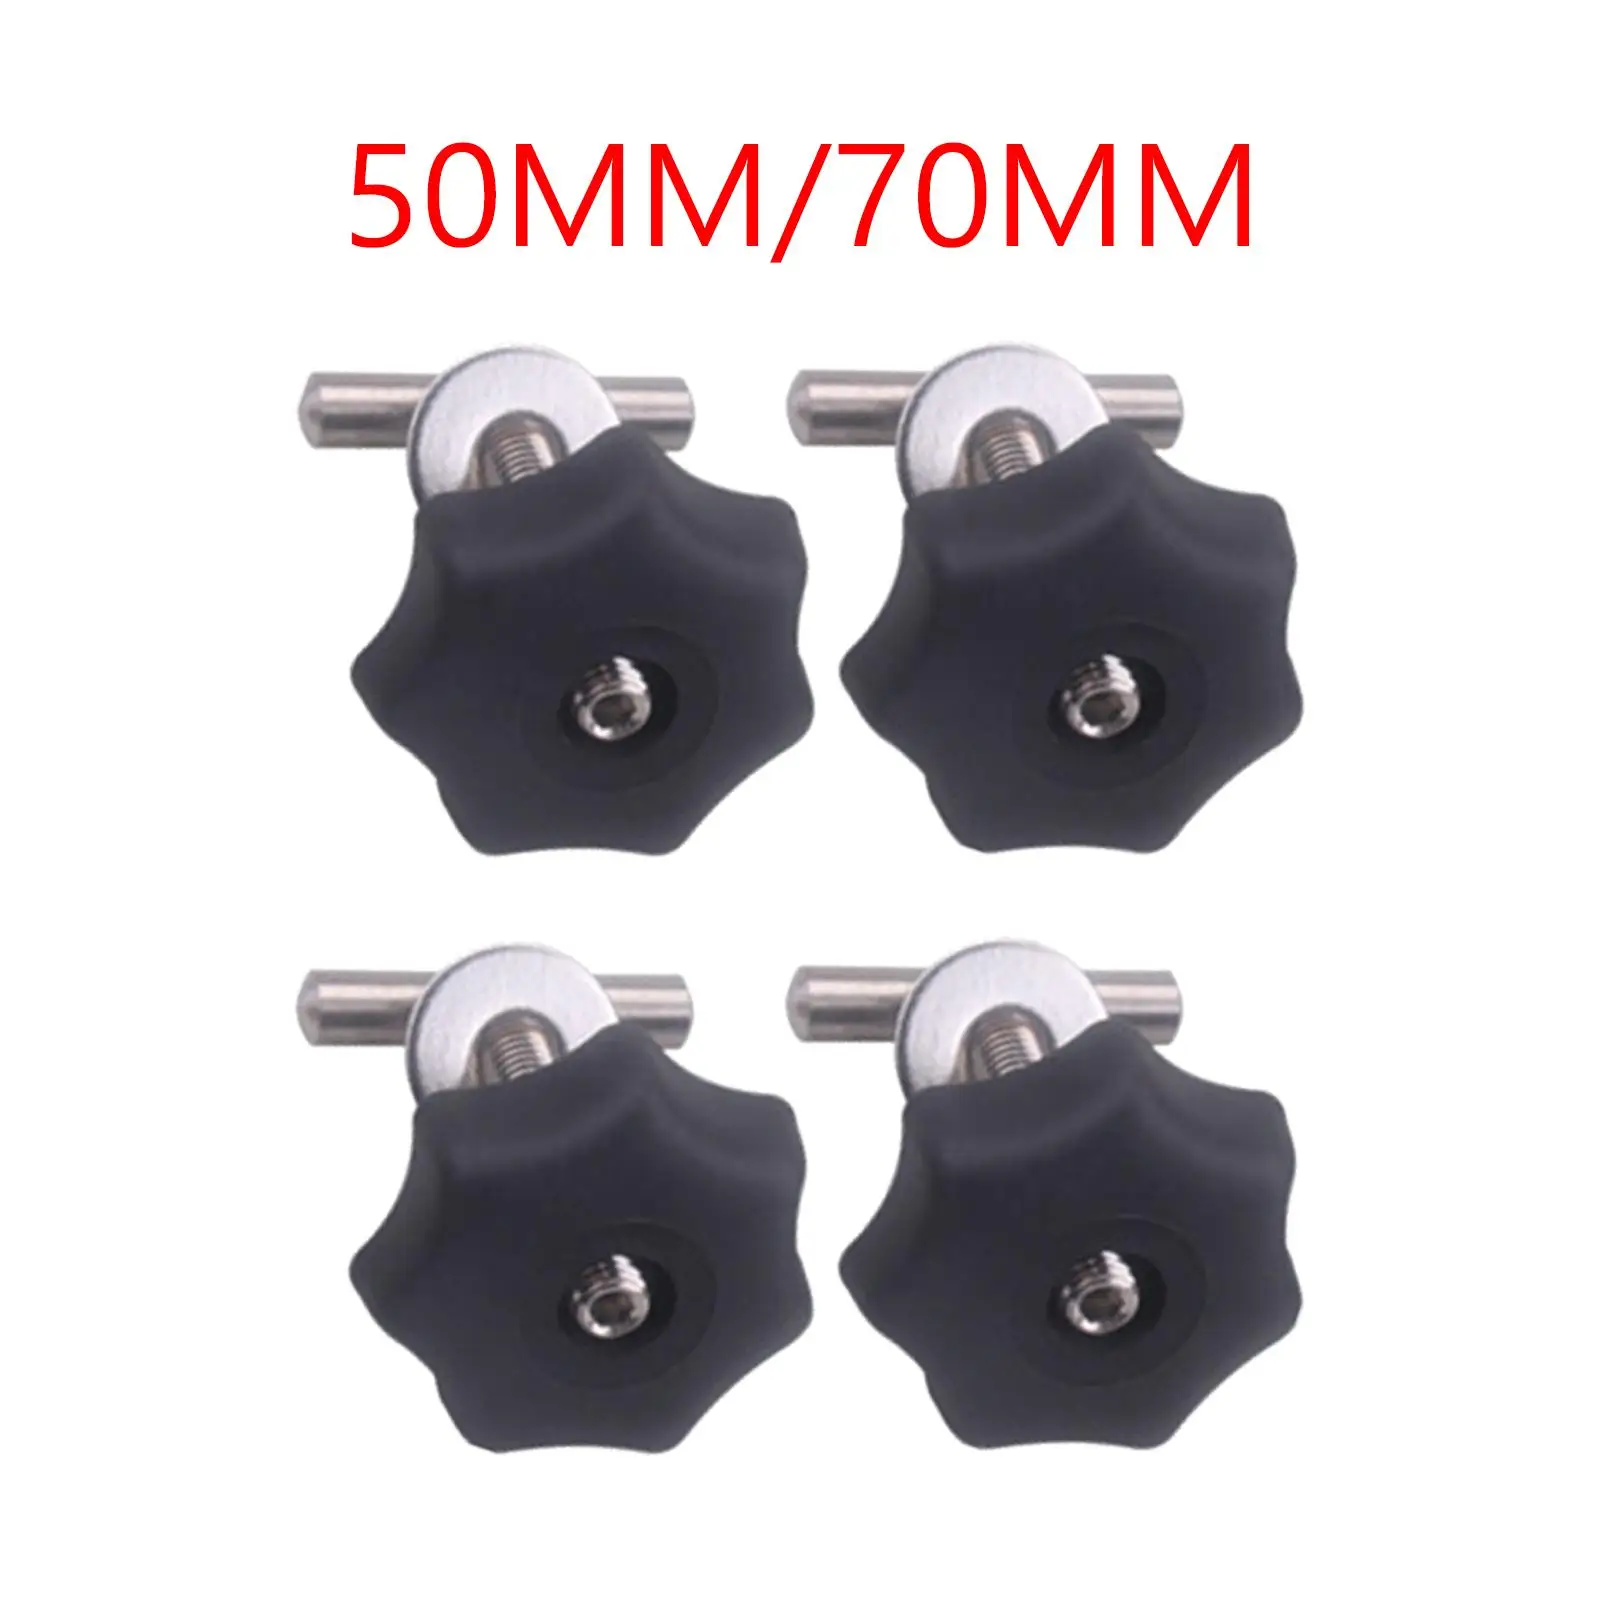 4x Mounting Screws Vehicle Parts Nut Set Stainless Supplies Durable Easy to Intall 50mm/70mm for vw T5 Upgrade